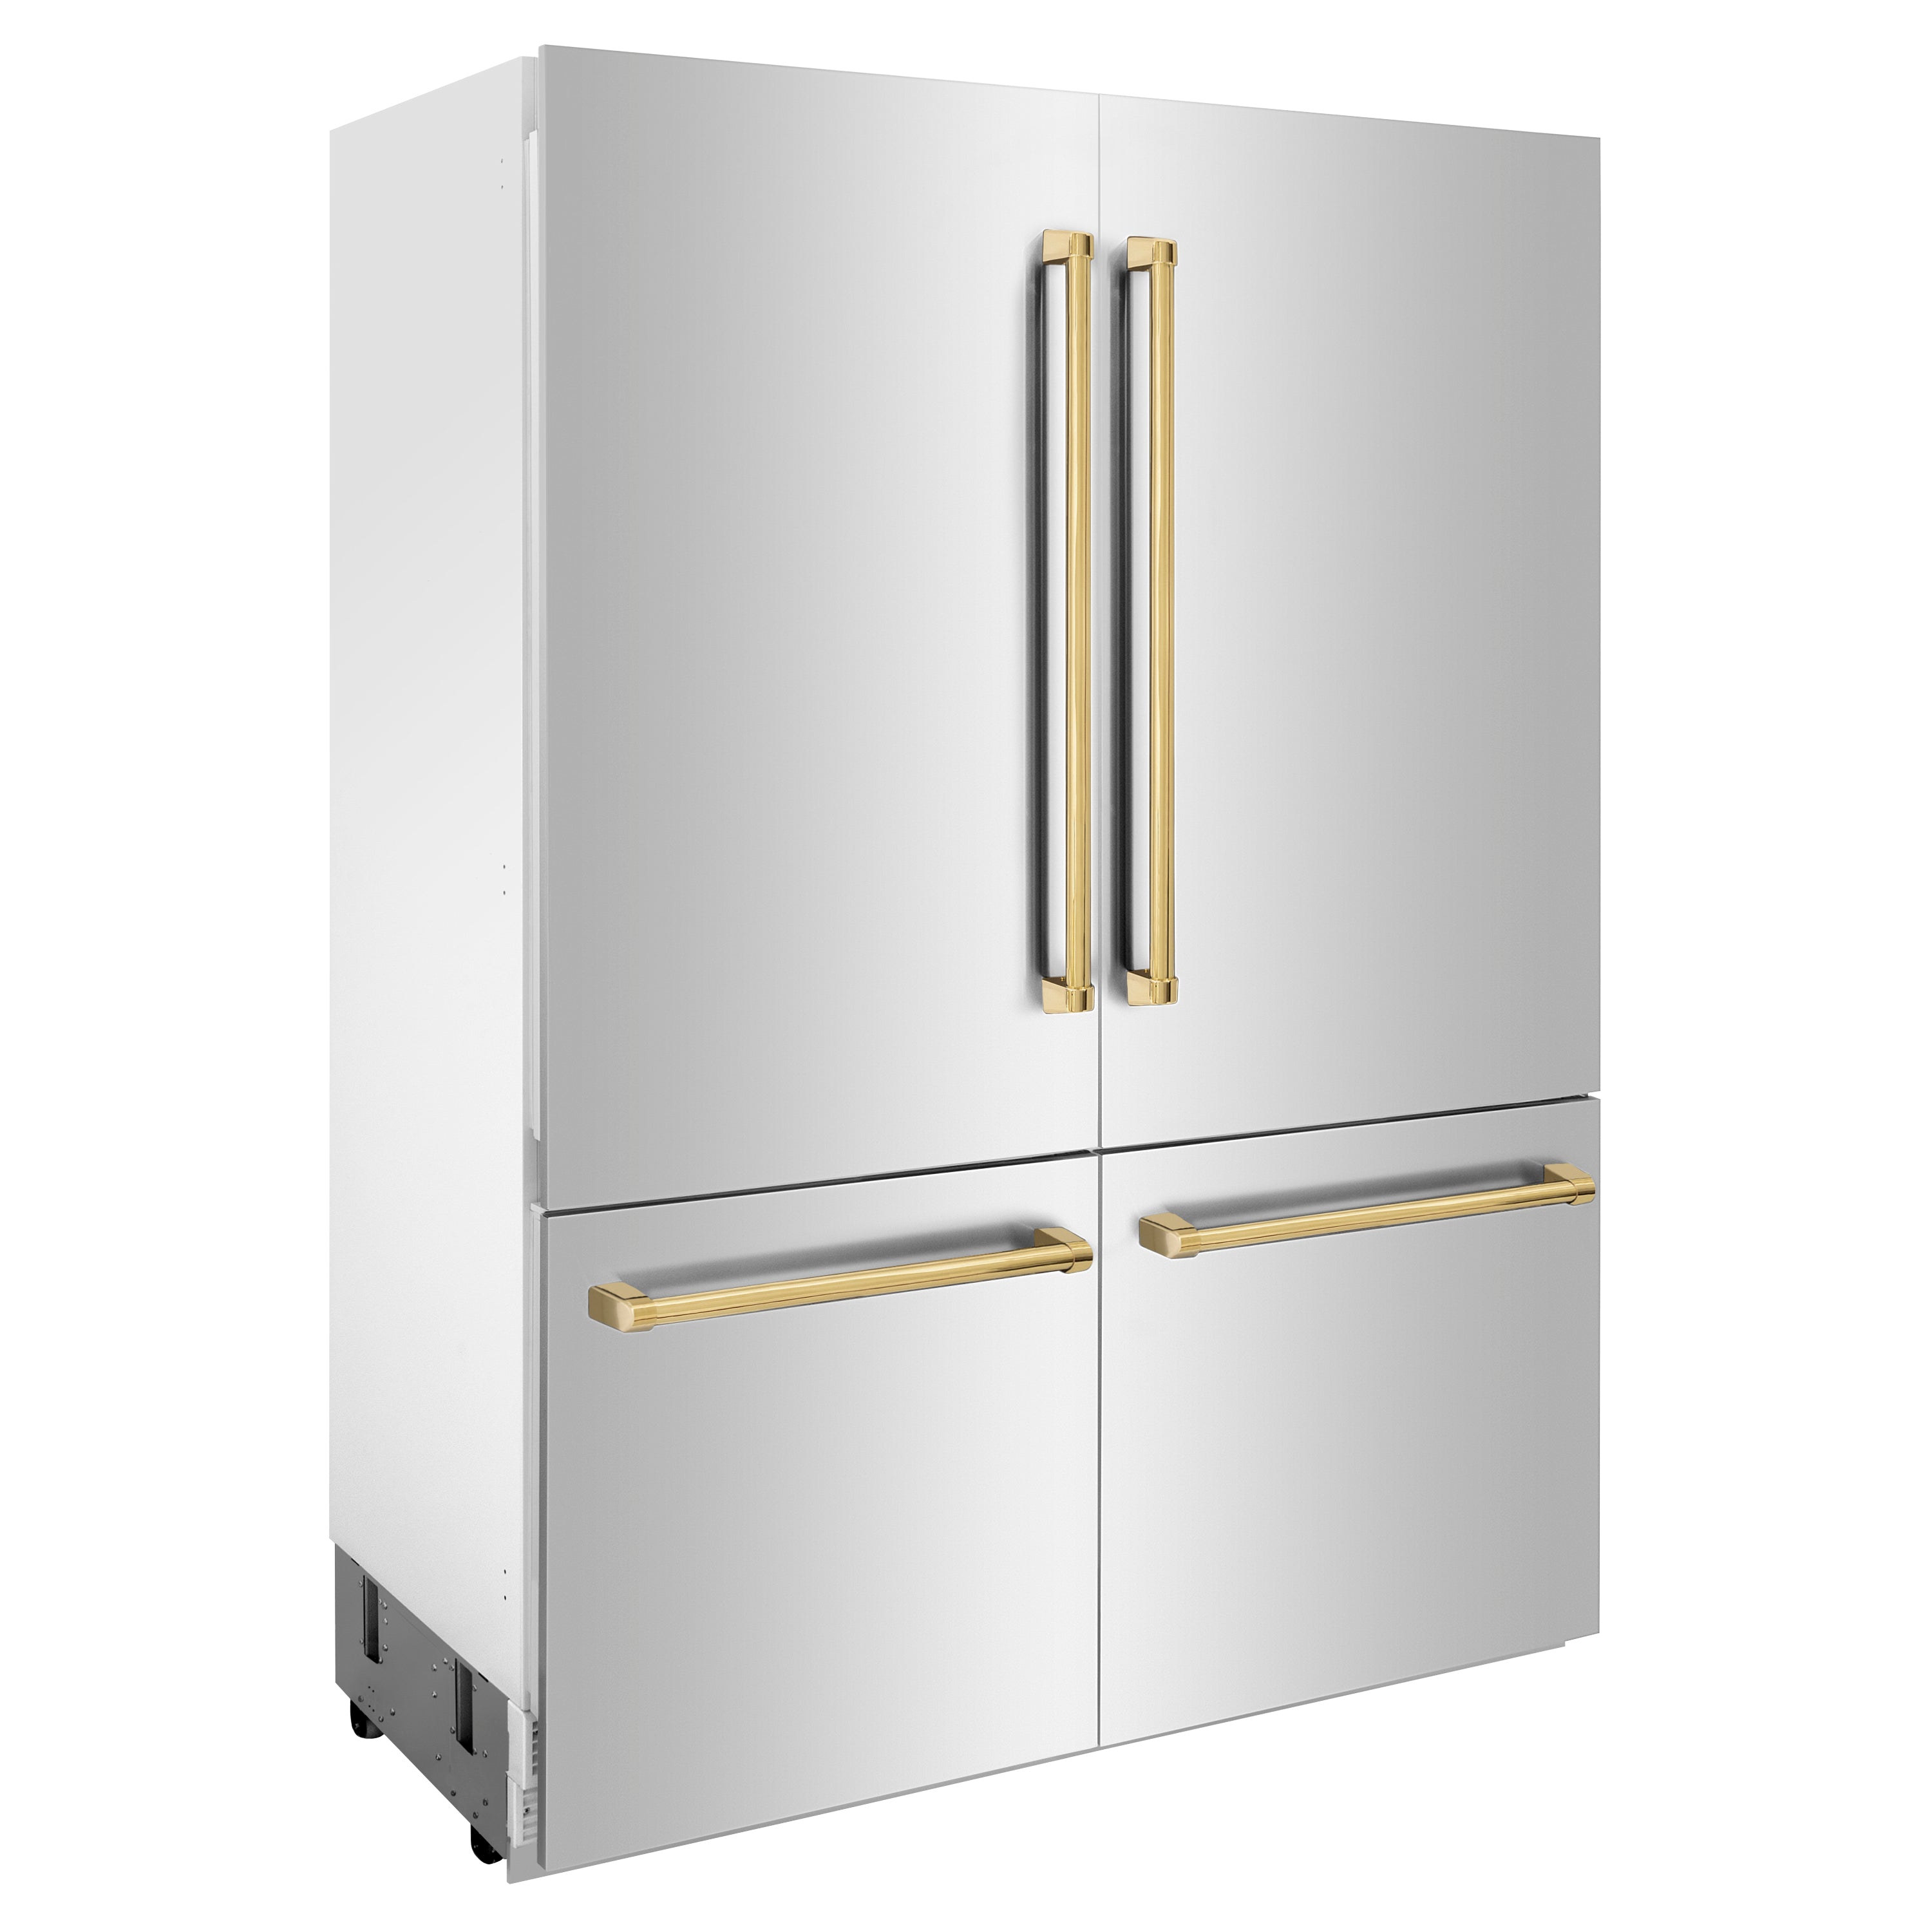 ZLINE 60" Autograph Edition 32.2 cu. ft. Built-in 4-Door French Door Refrigerator with Internal Water and Ice Dispenser in Stainless Steel with Polished Gold Accents